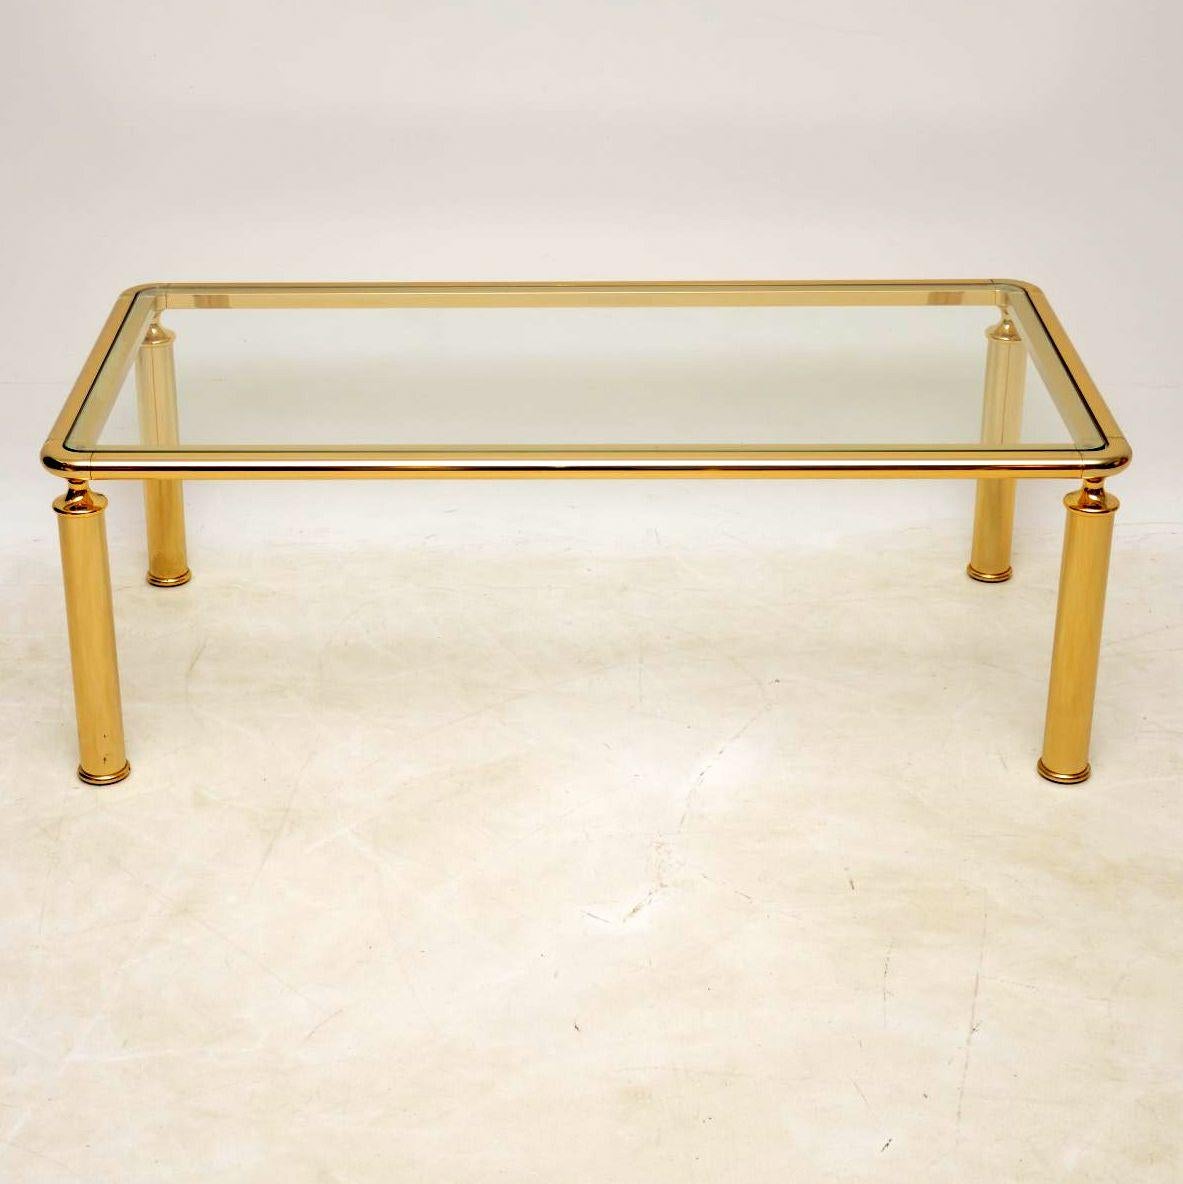 A fantastic vintage brass and glass coffee table, this is of amazing quality, it was probably made in France or Italy in the 1970s. The condition is great for its age, with only some extremely minor surface wear here and there. 

Measures: Width –